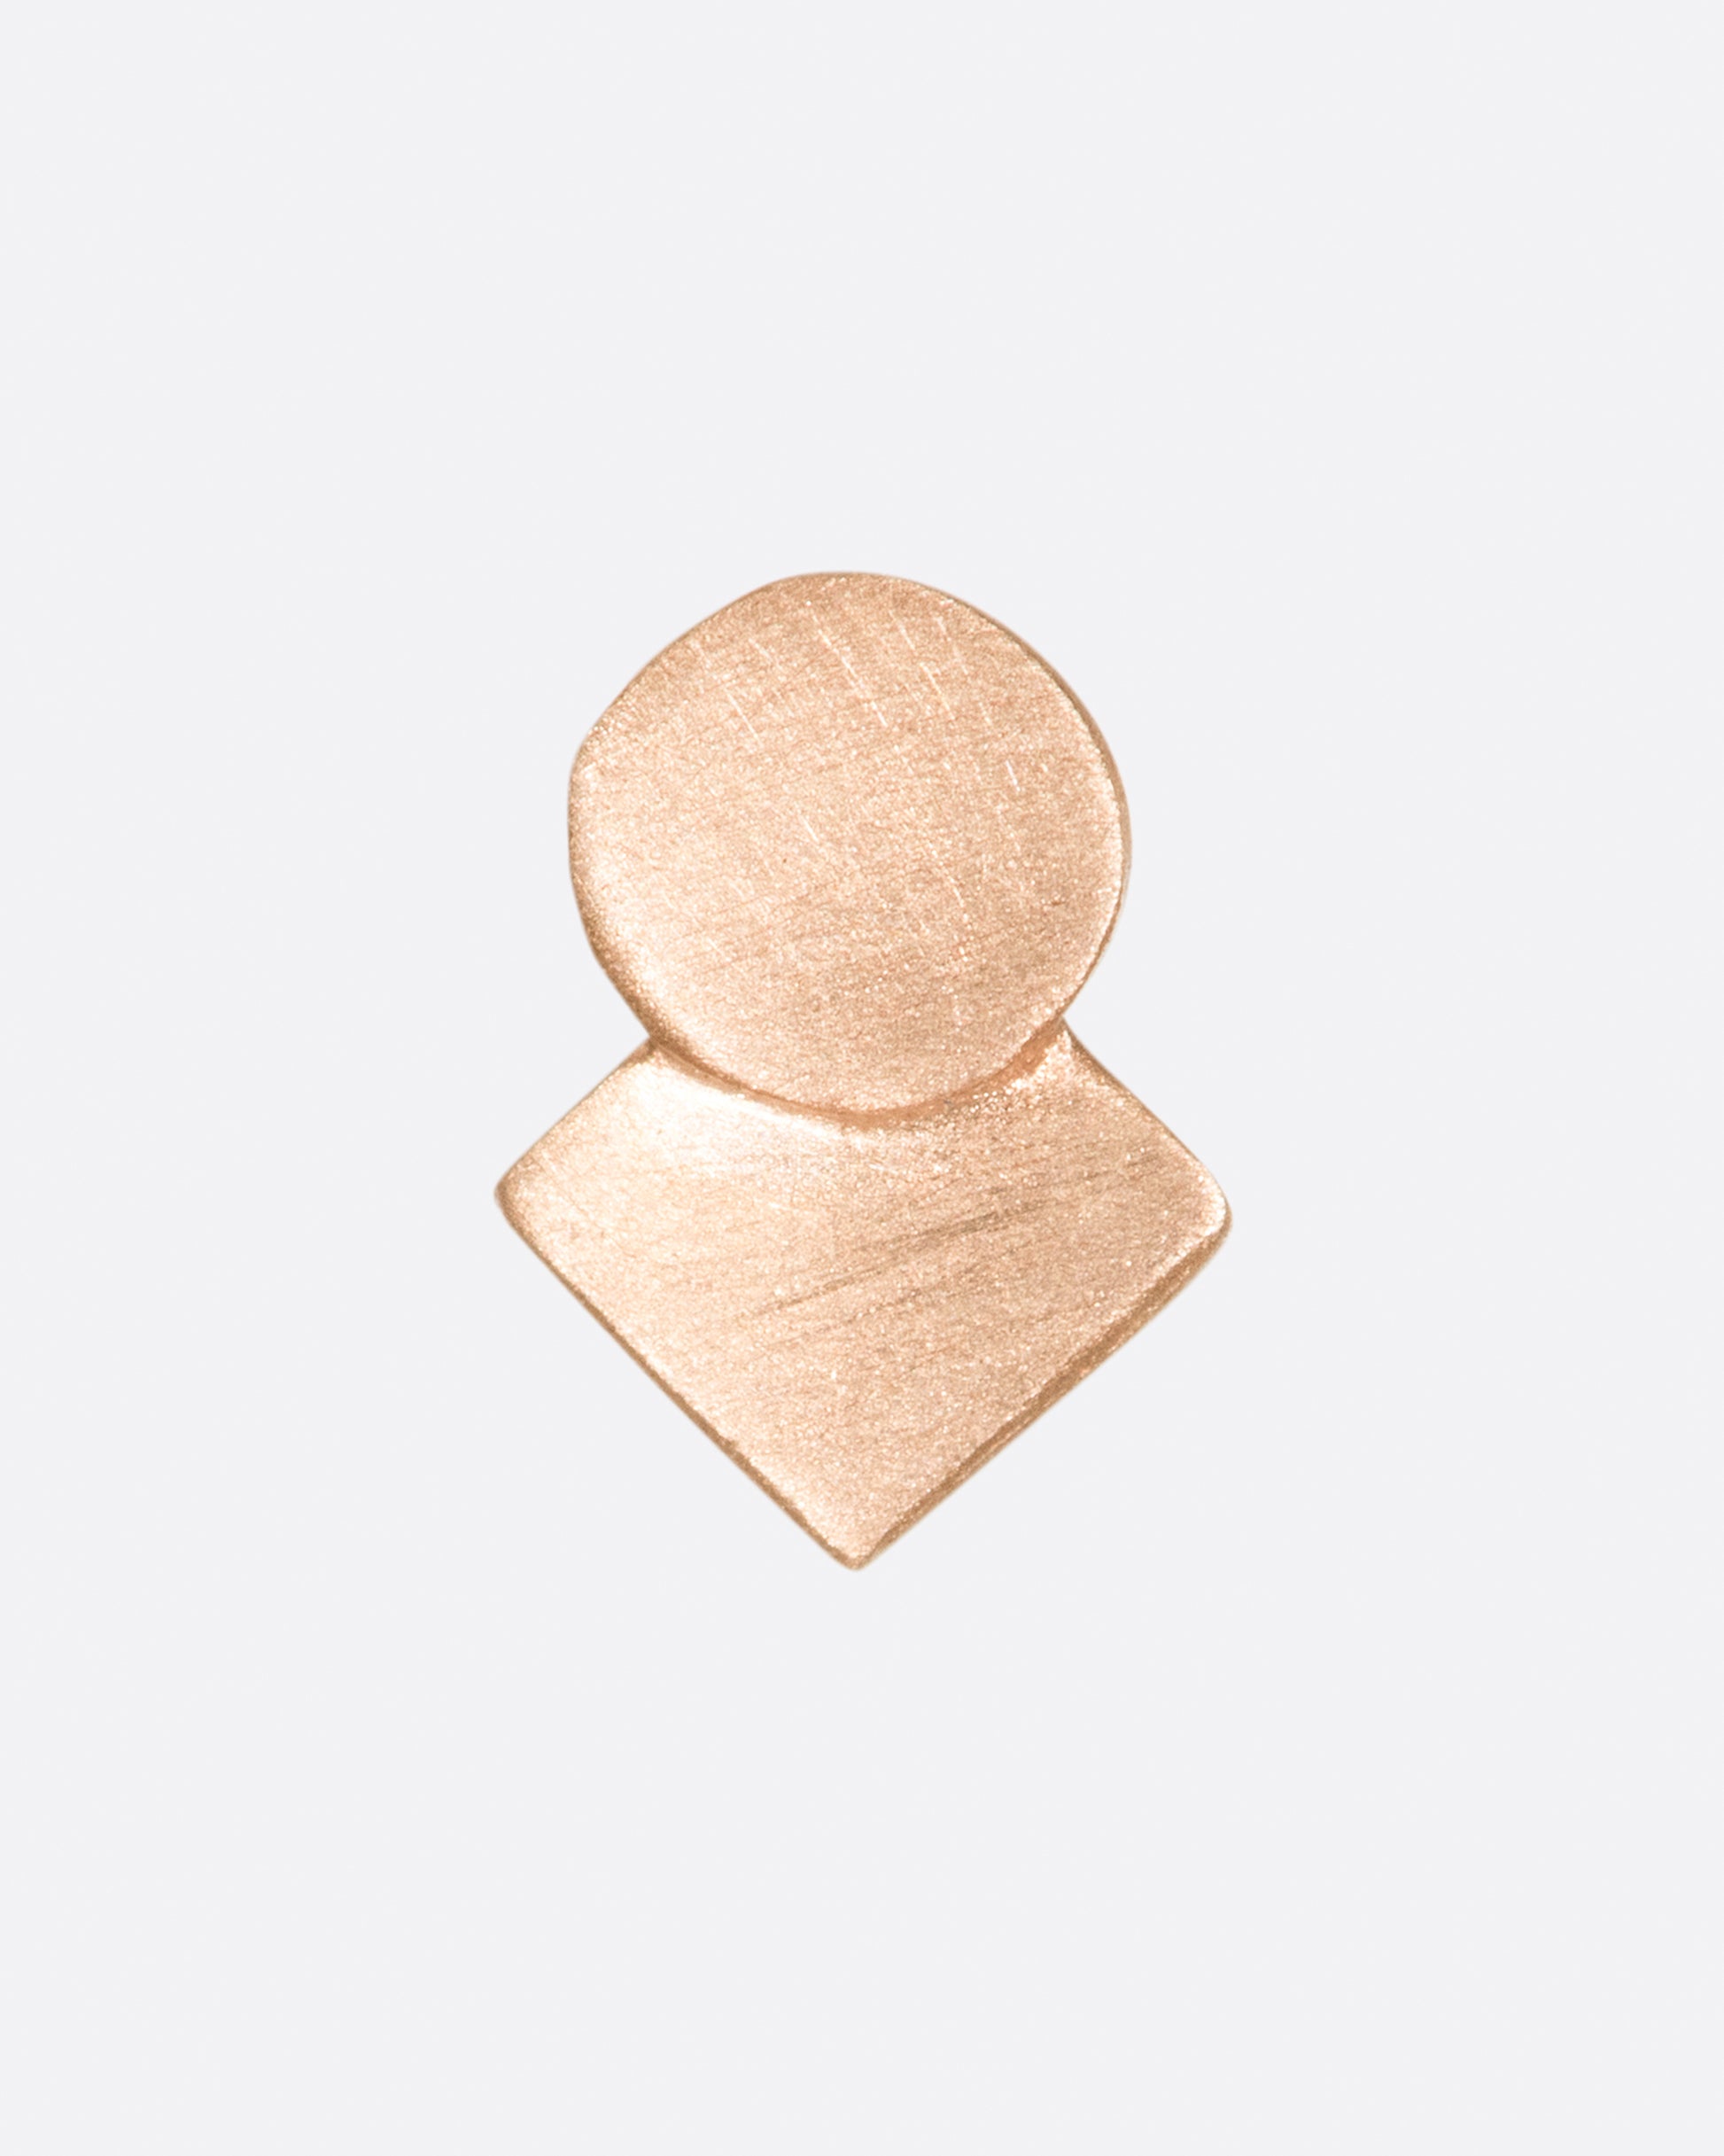 A square stud earring with overlapping circle and matte finish.